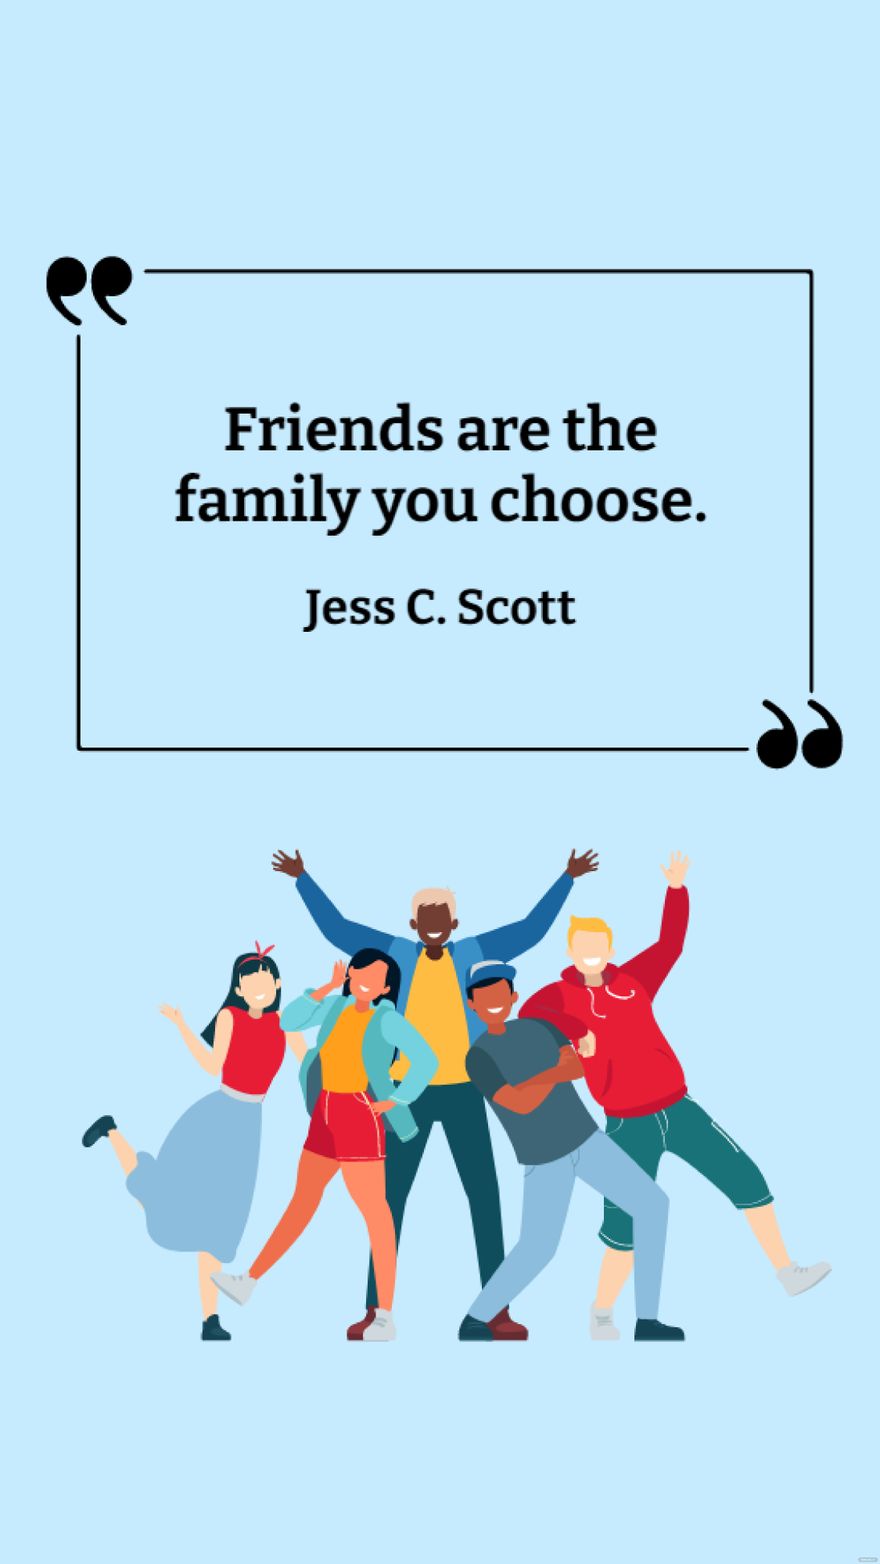 Free Jess C. Scott - Friends are the family you choose.